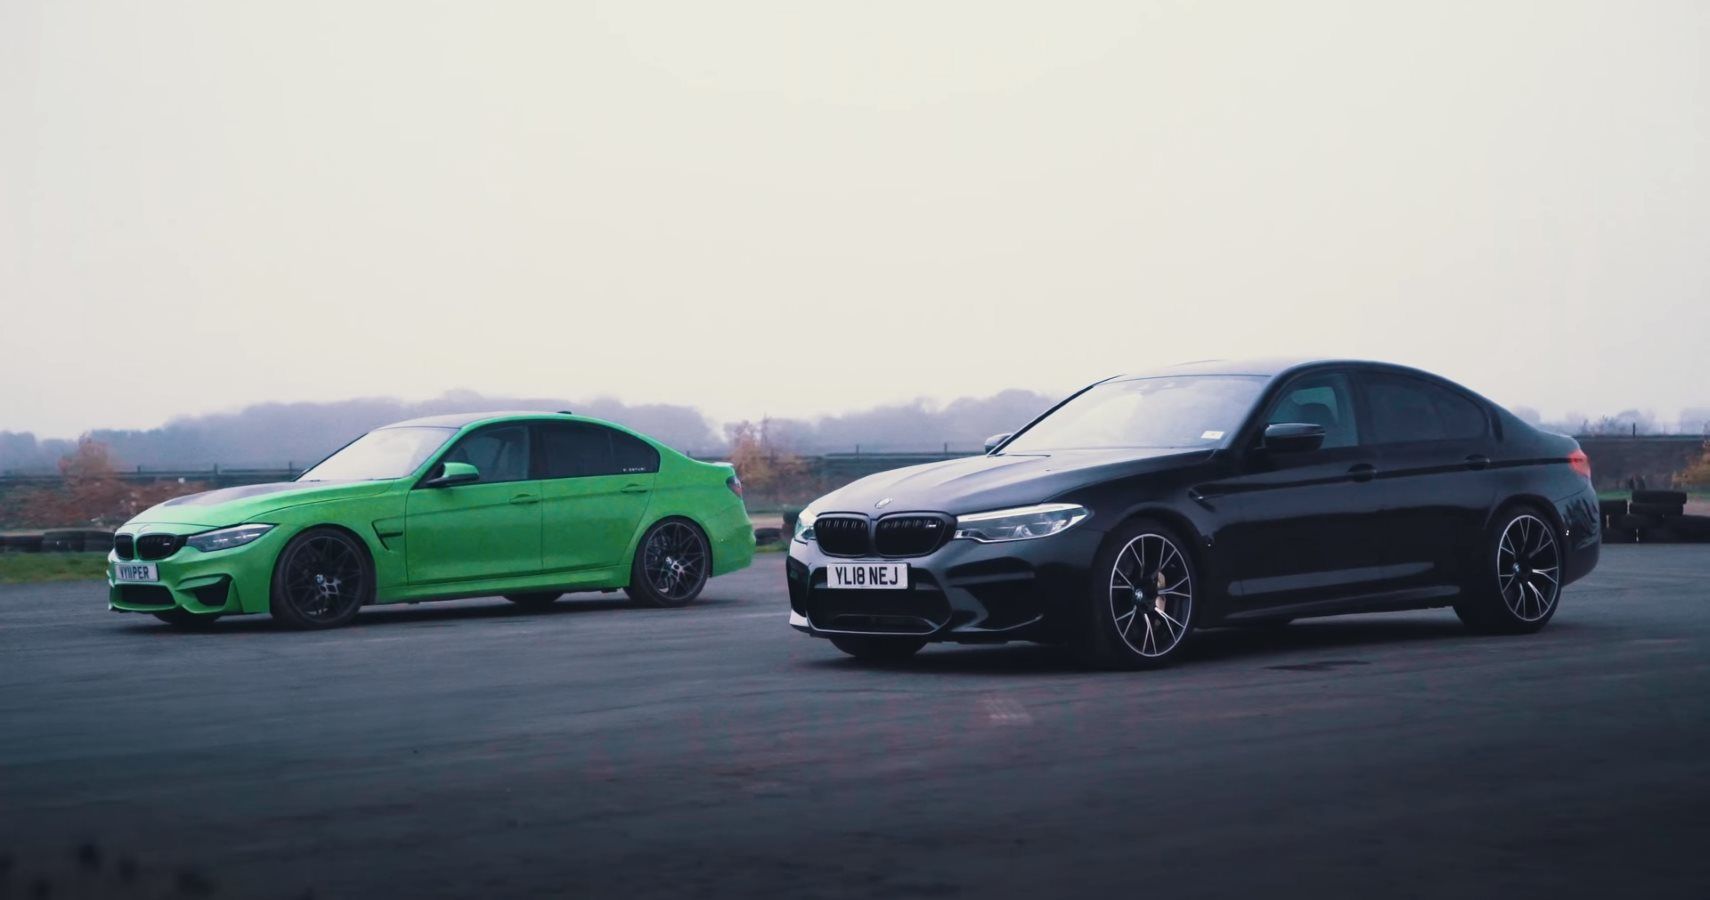 Battle Of The Bimmers As Tuned M3 Takes On BMW M5 In Drag And Rolling Races